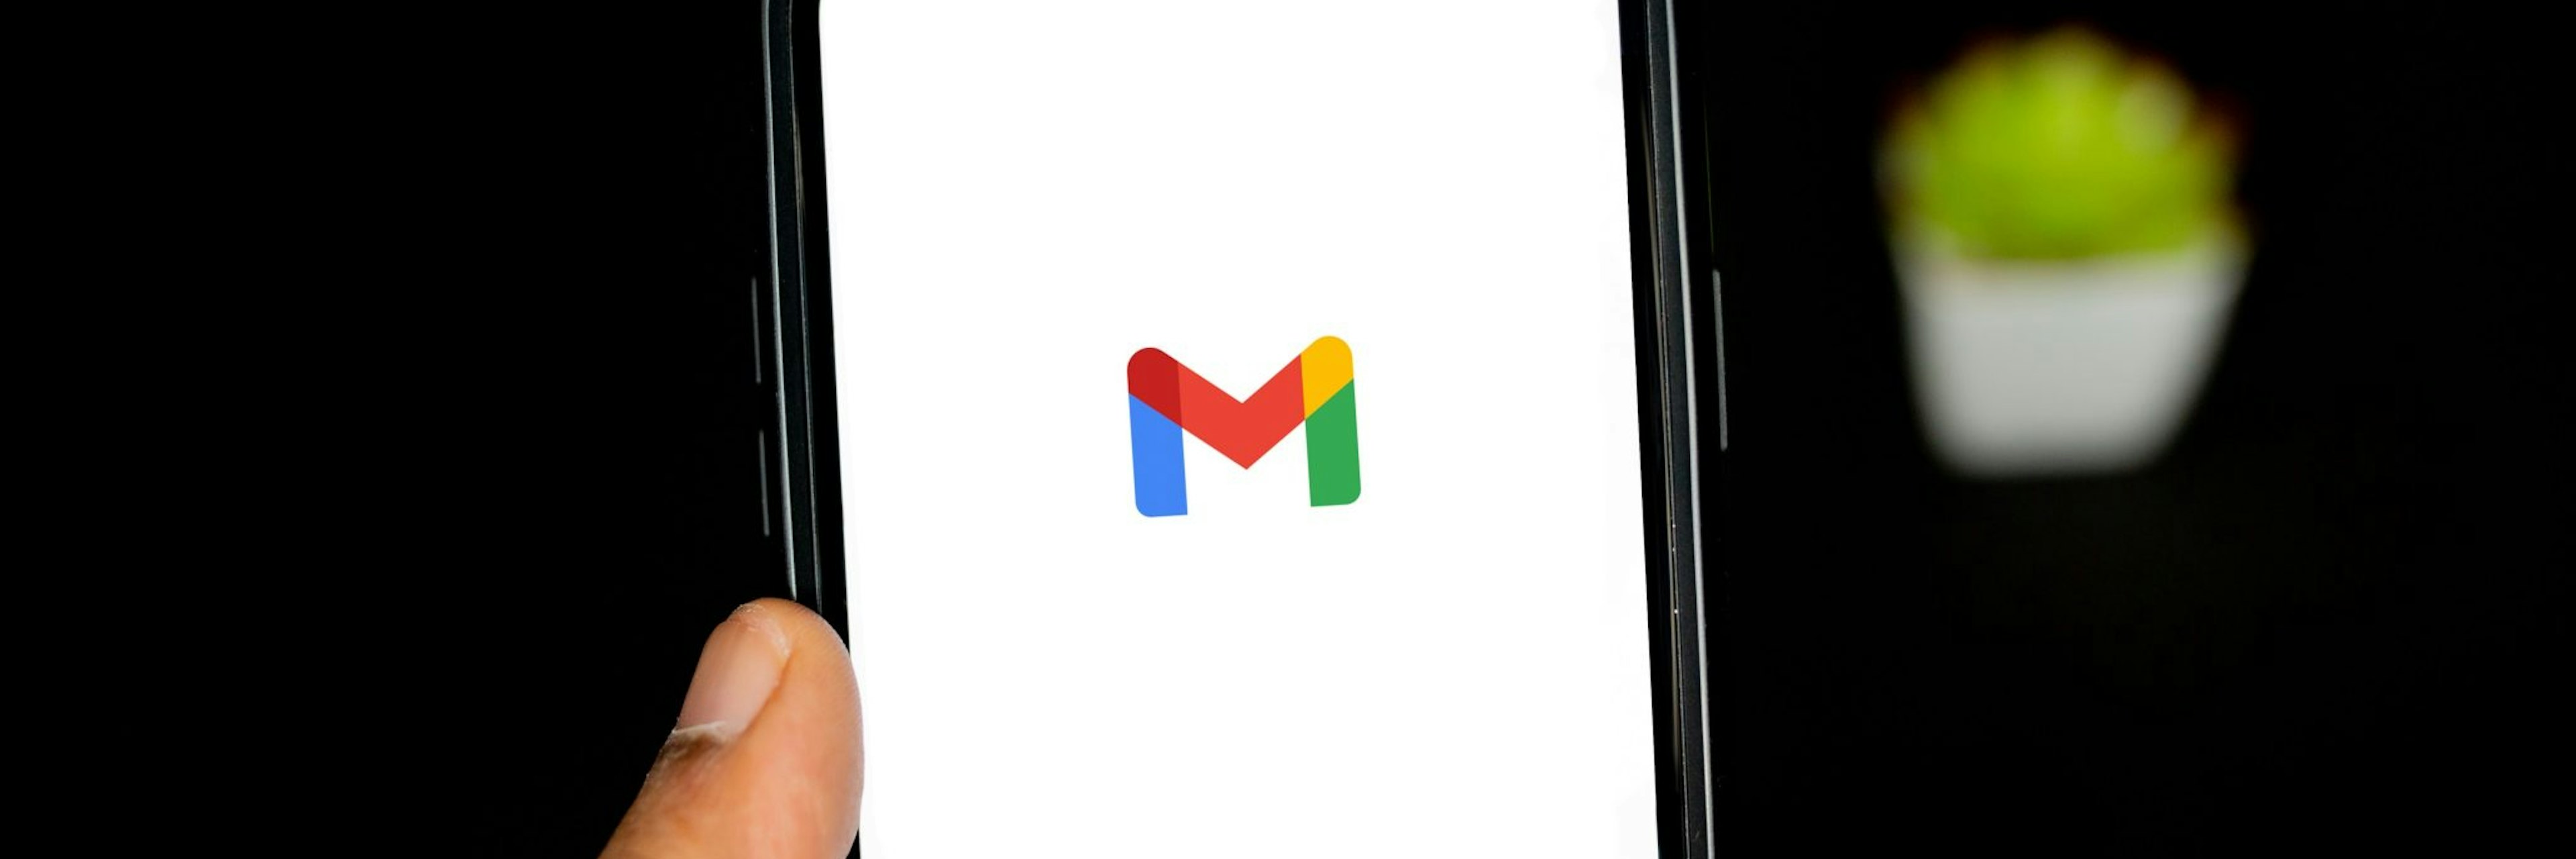 A mobile phone with the gmail logo on the screen